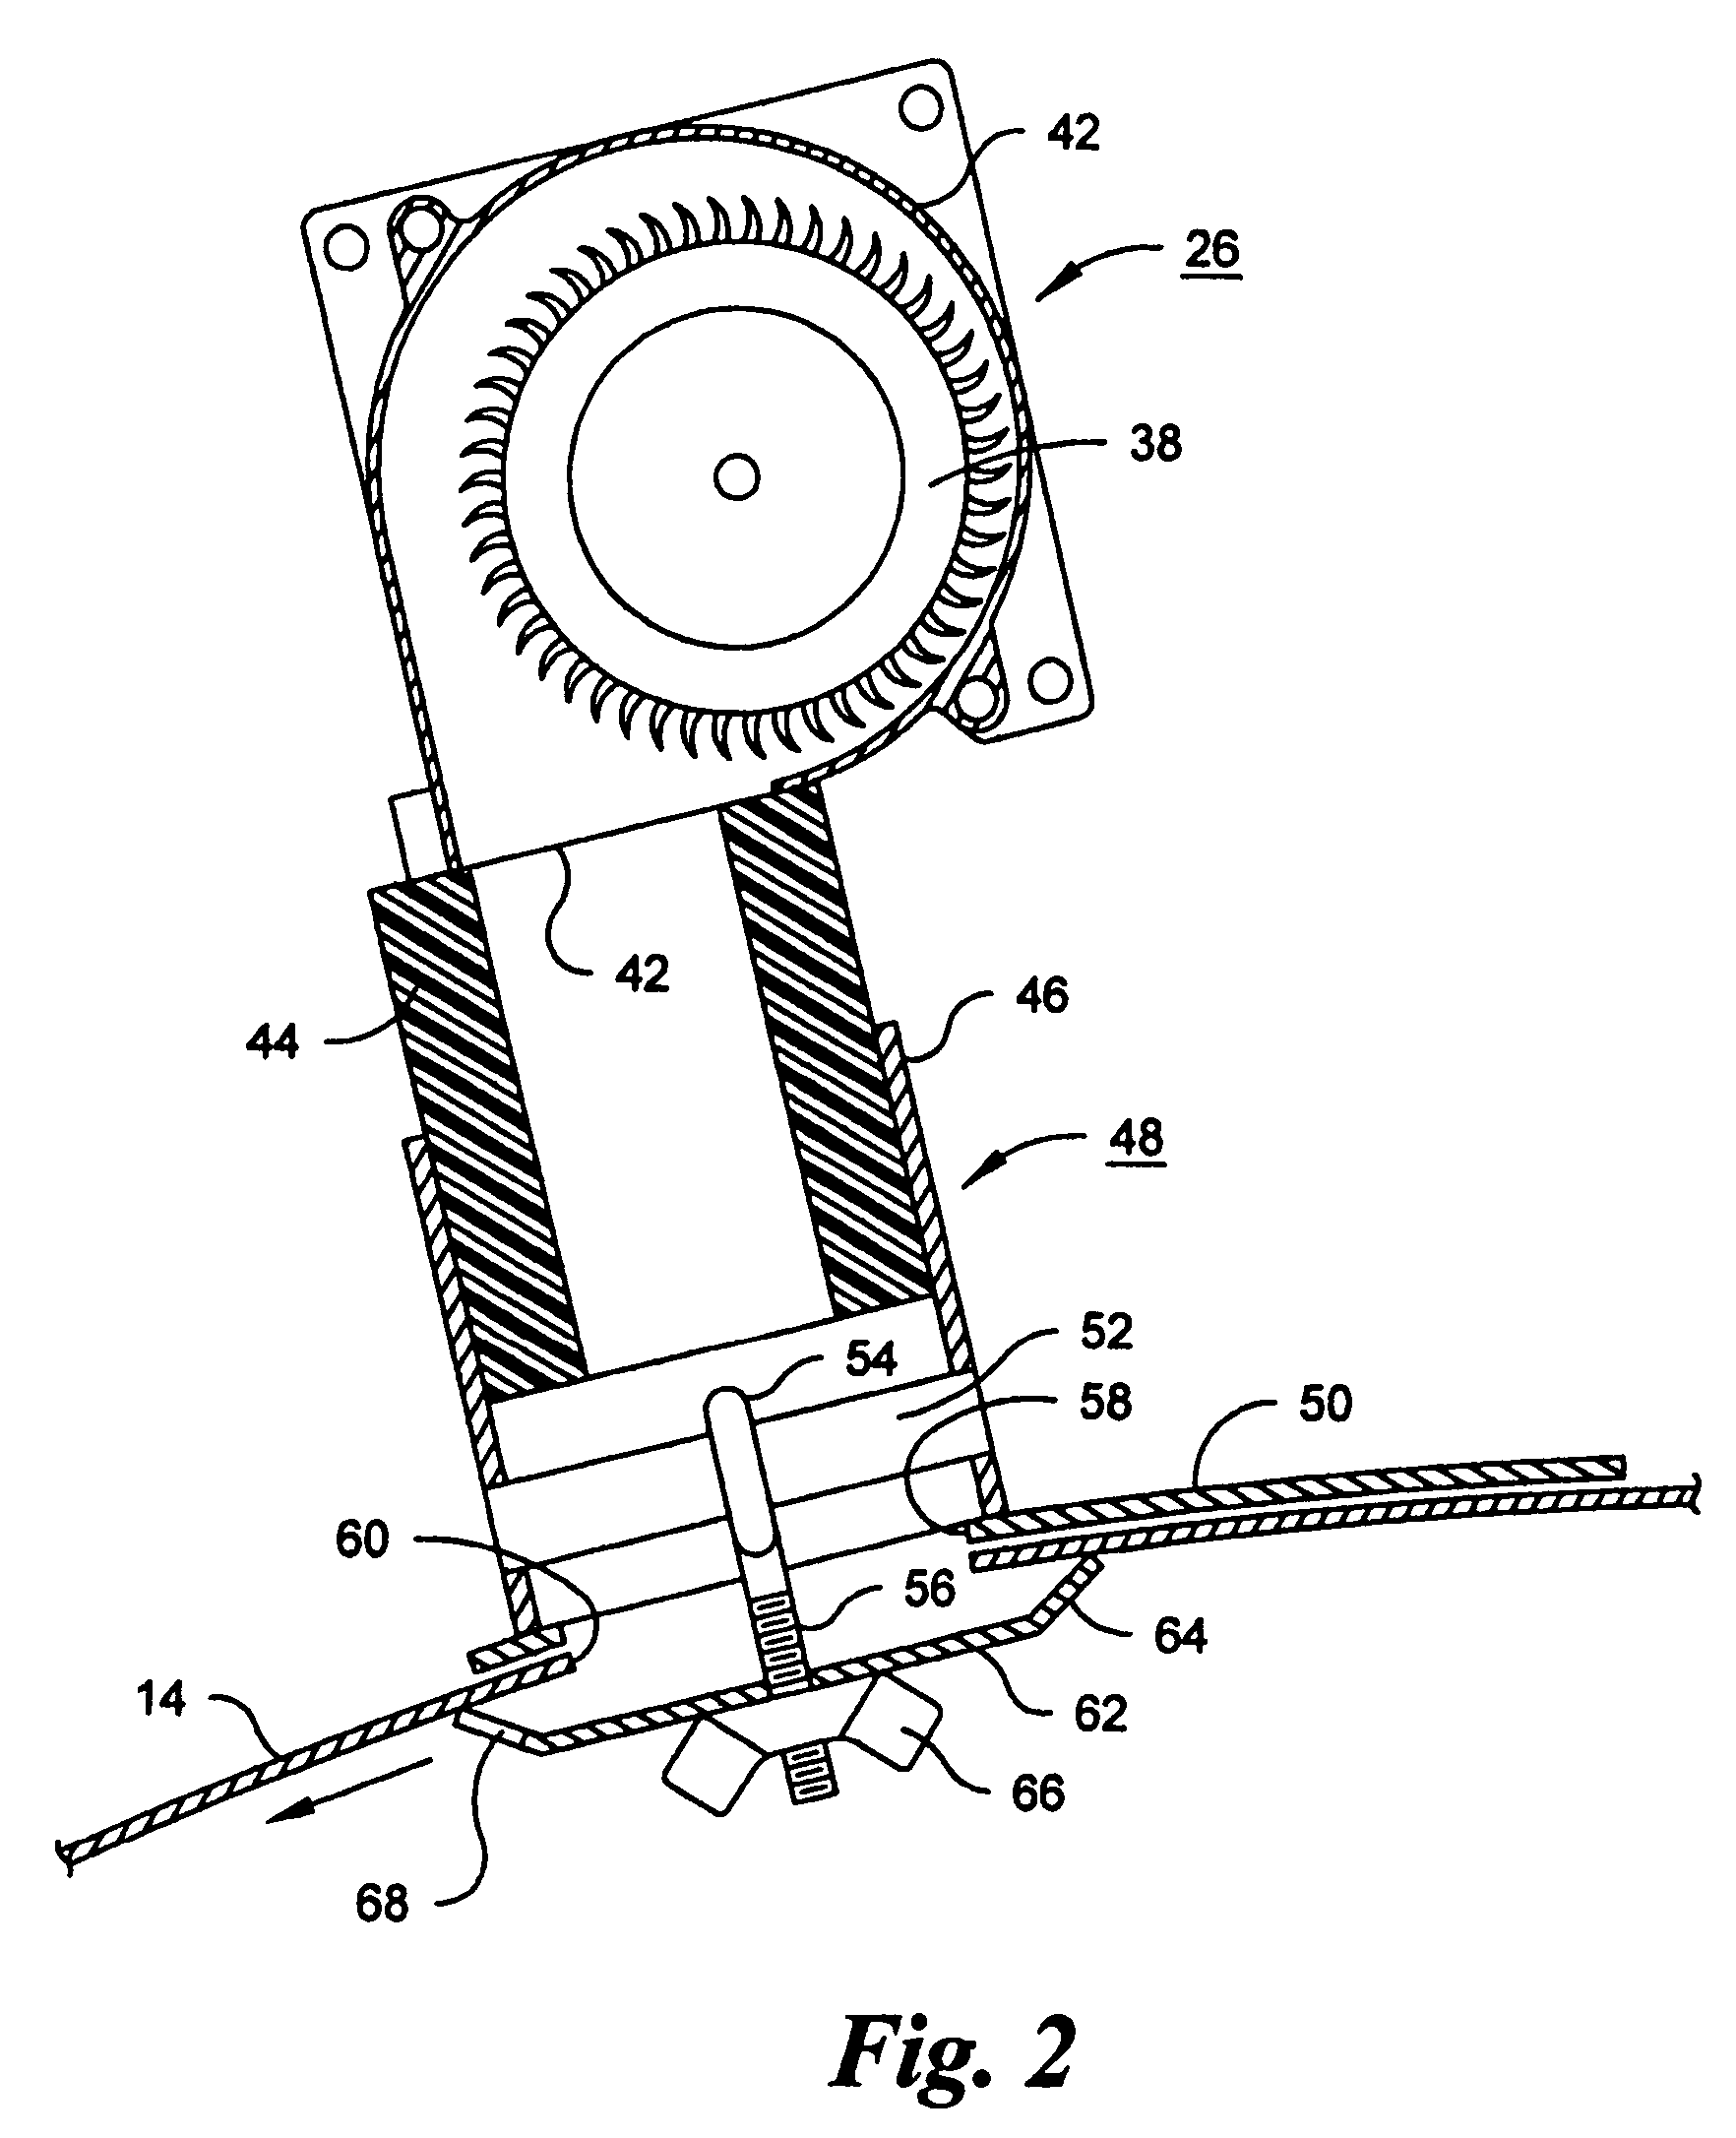 Method and apparatus for slow cooking